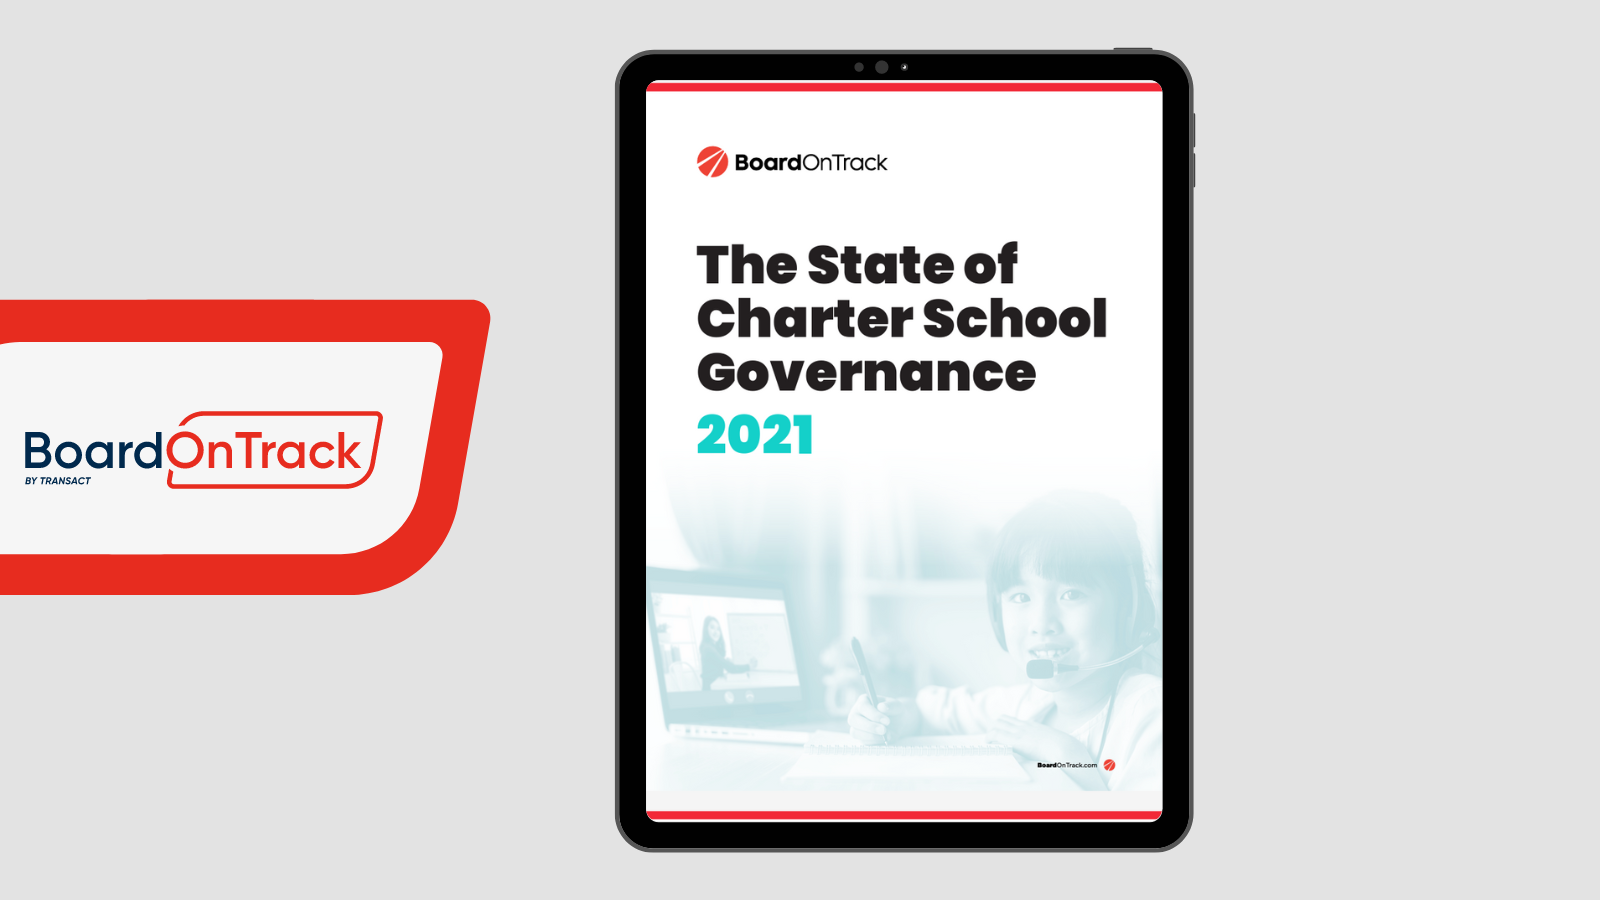 The State of Charter School Governance: 2021